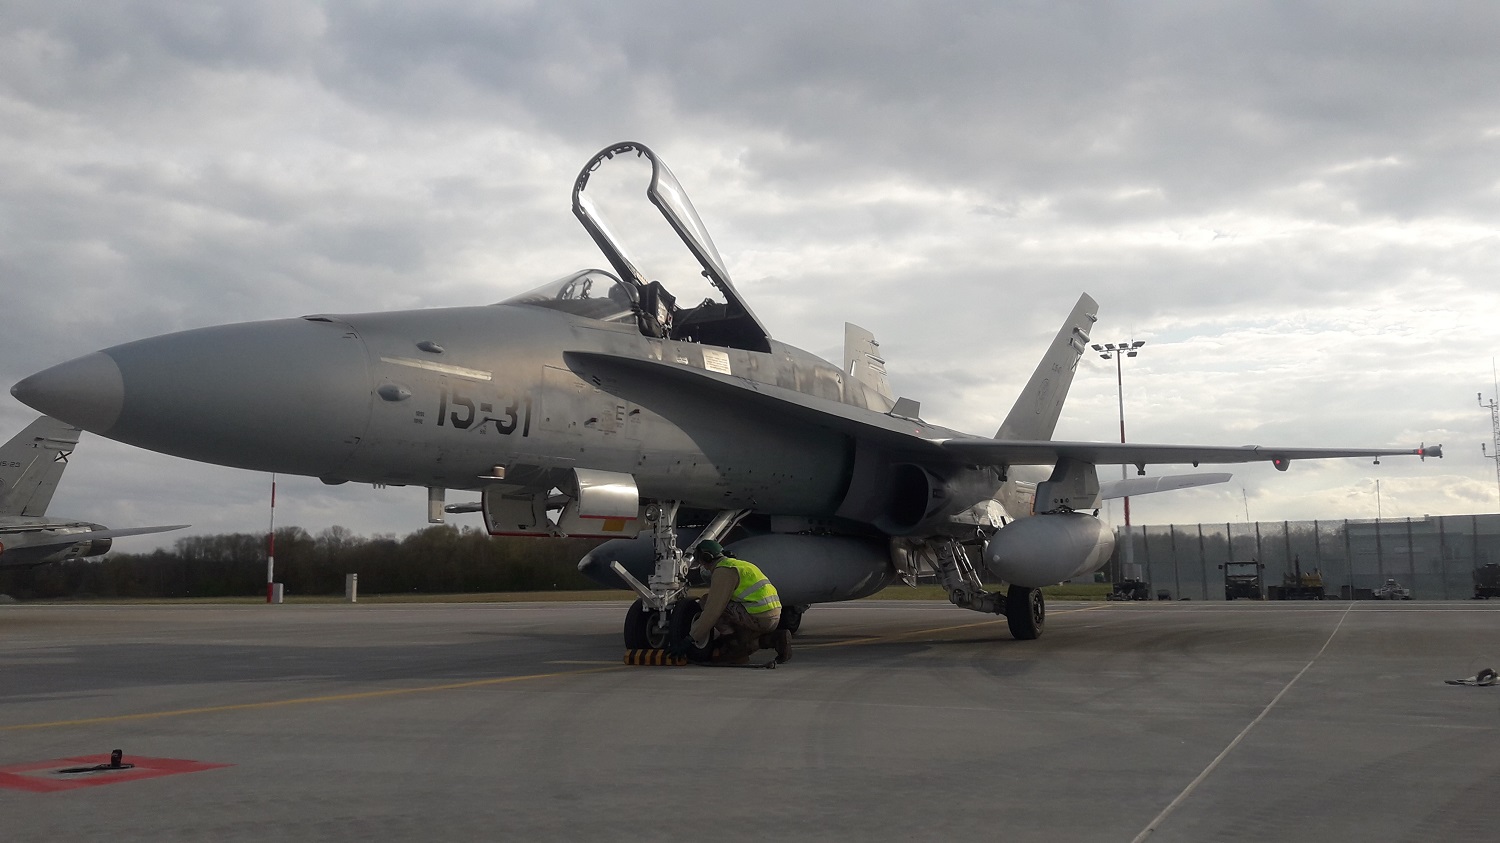 The Spanish Armed Forces lead NATO Baltic Air Policing mission